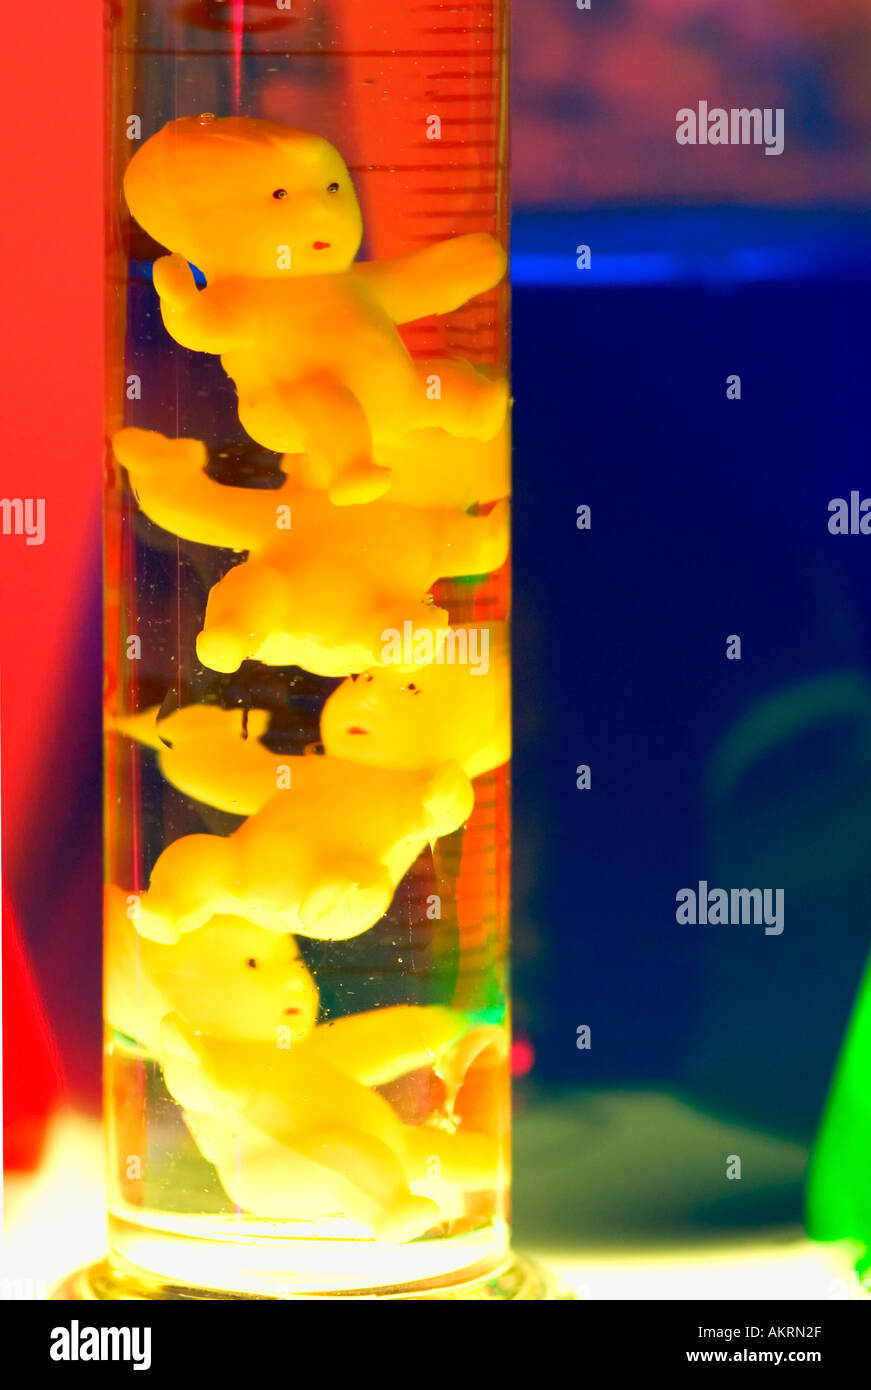 Four plastic baby dolls in a test tube filled with colorful glowing liquid Stock Photo